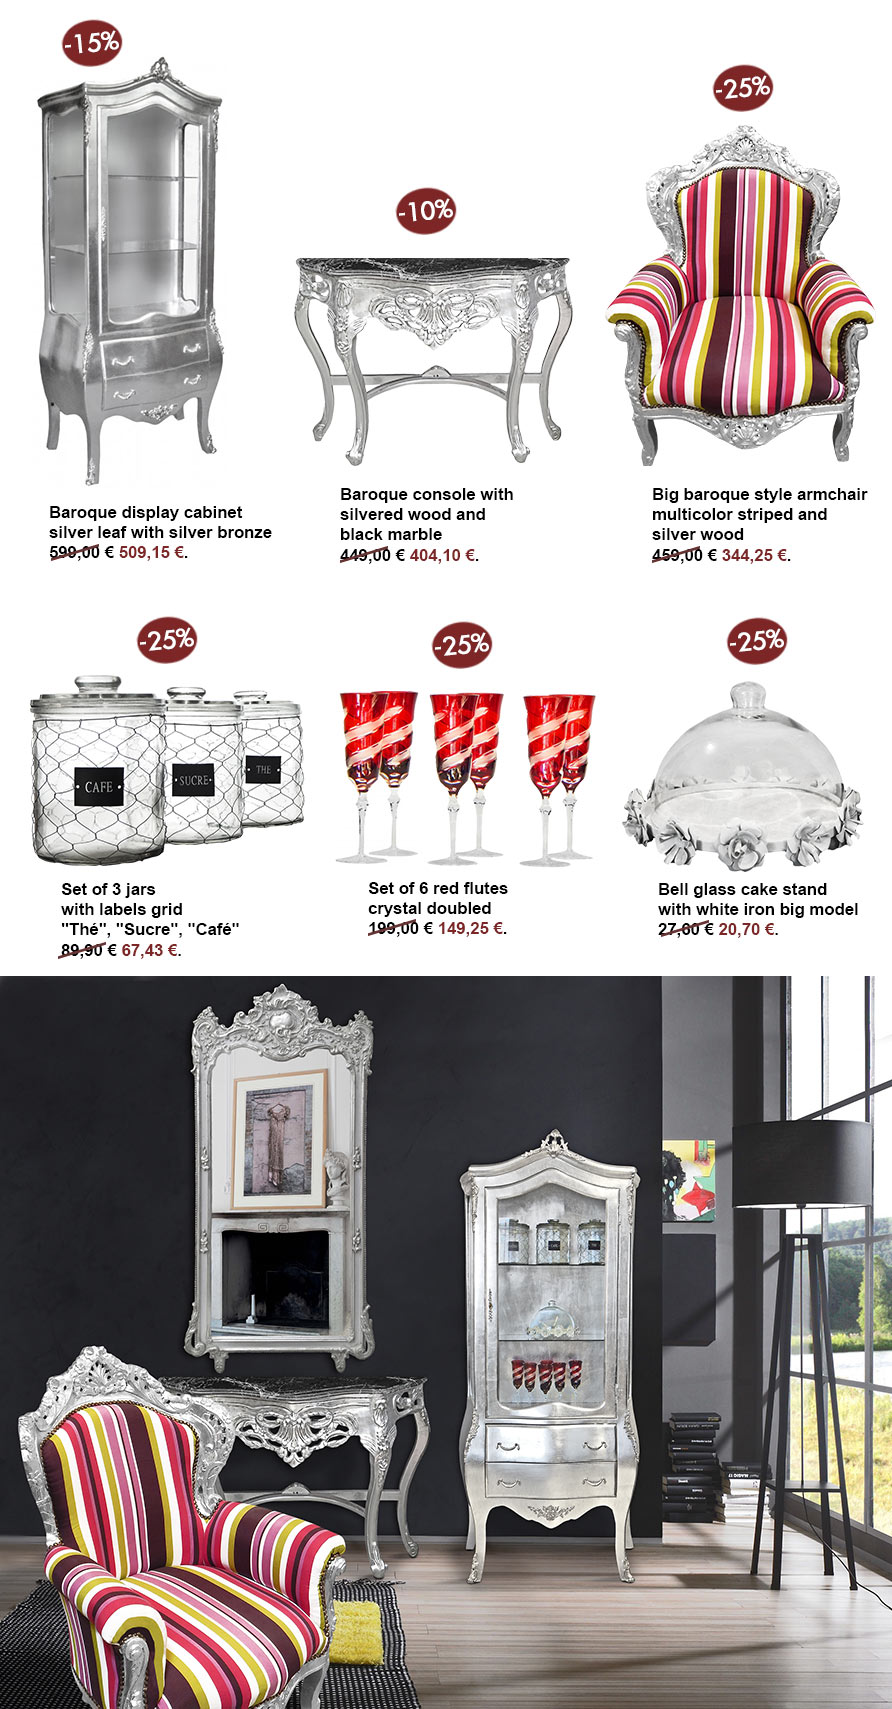 low prices on furniture and baroque mirrors